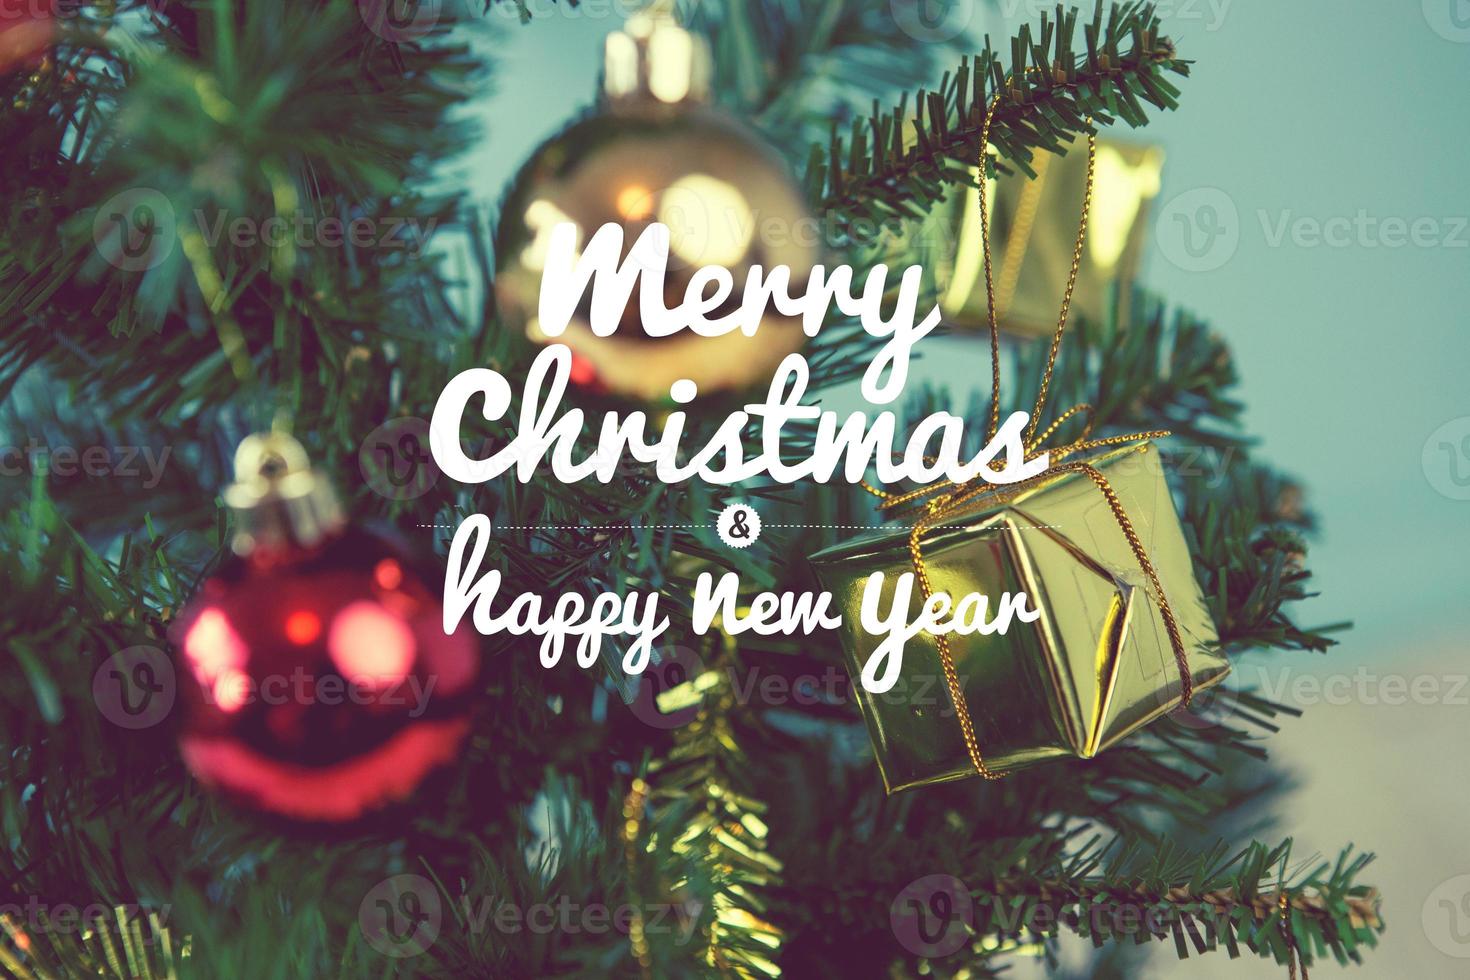 Christmas tree with gifts on green background on blurred, vintage color style and text - Merry Christmas and Happy New Year photo